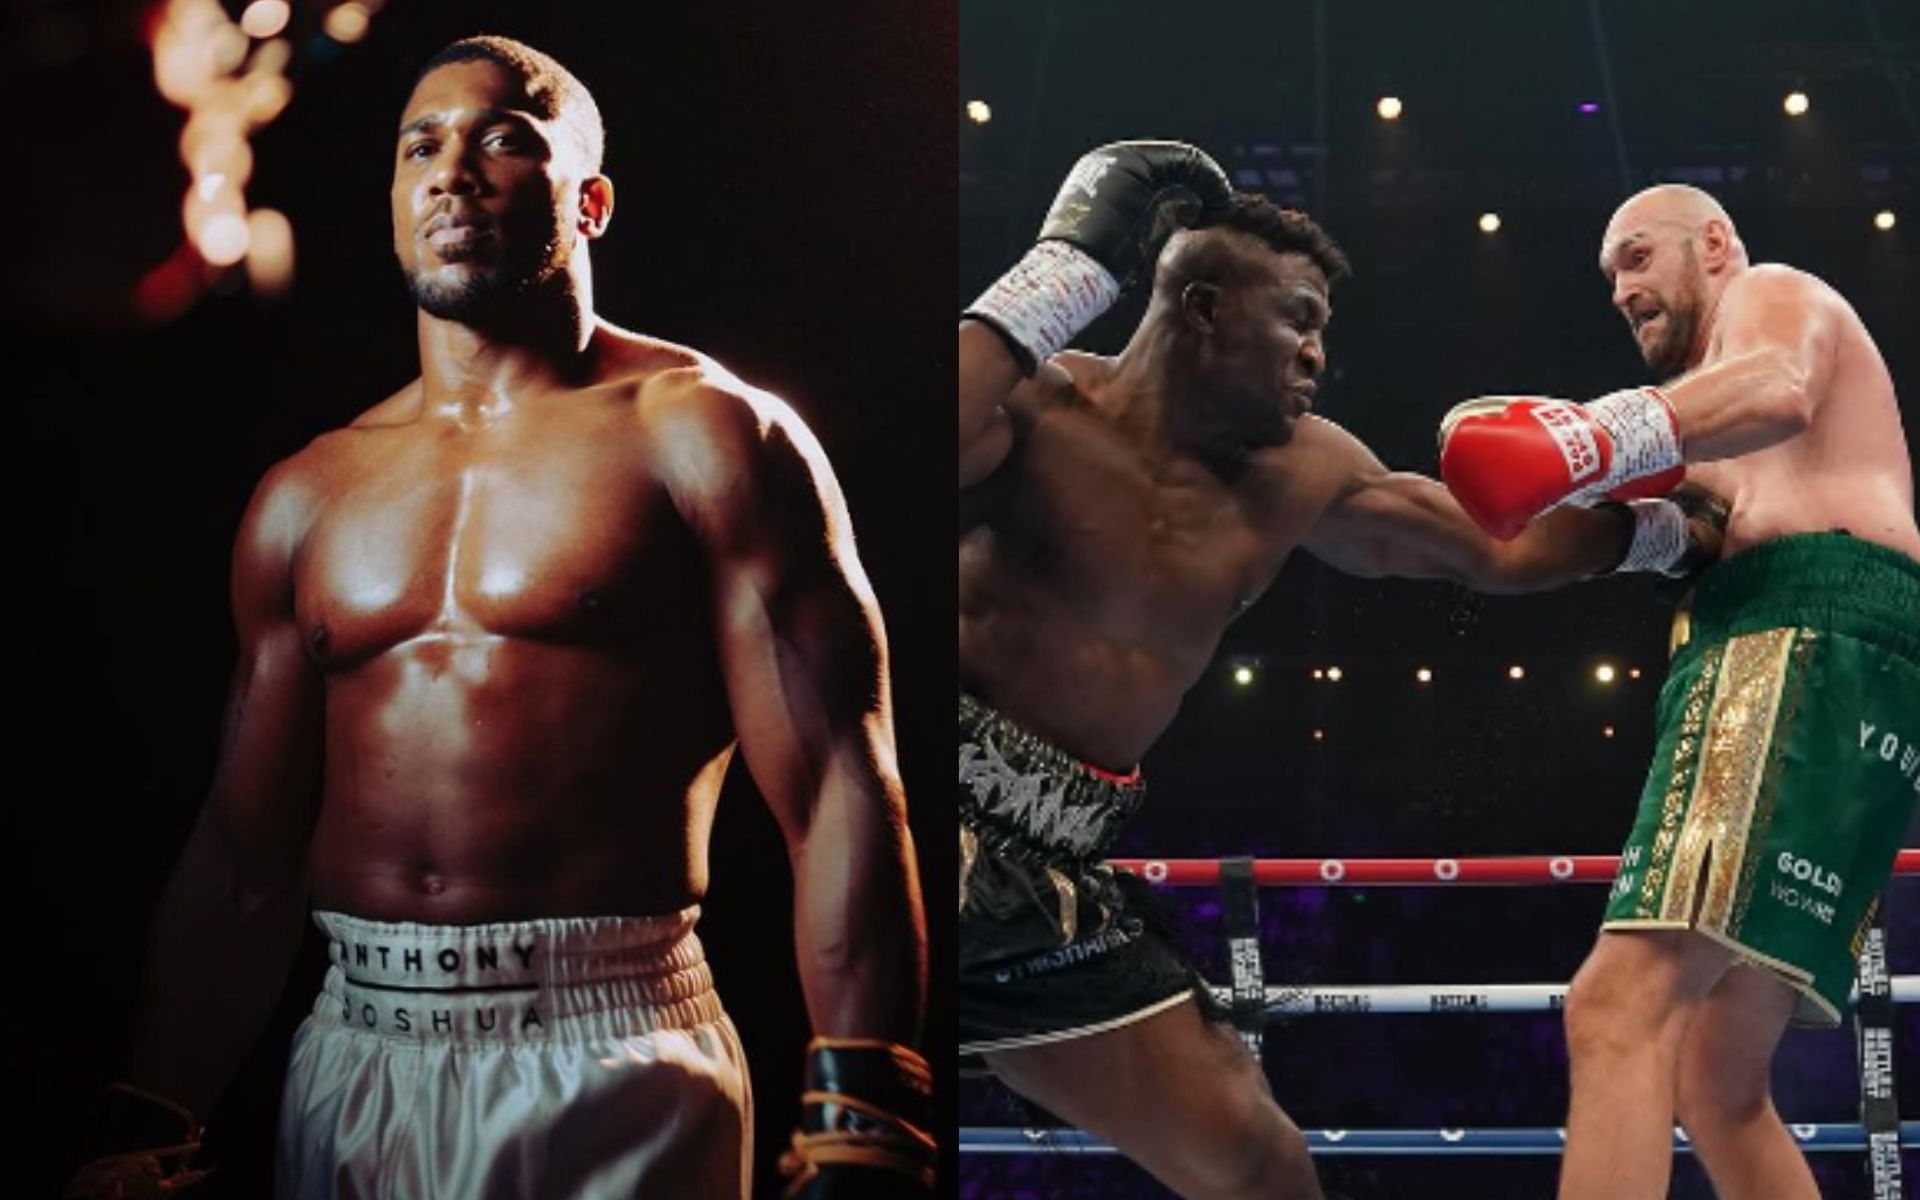 Carl Froch has changed his mind on Tyson Fury vs. Anthony Joshua thanks to Francis Ngannou. [Images via @francisngannou and @anthonyjoshua on Instagram]